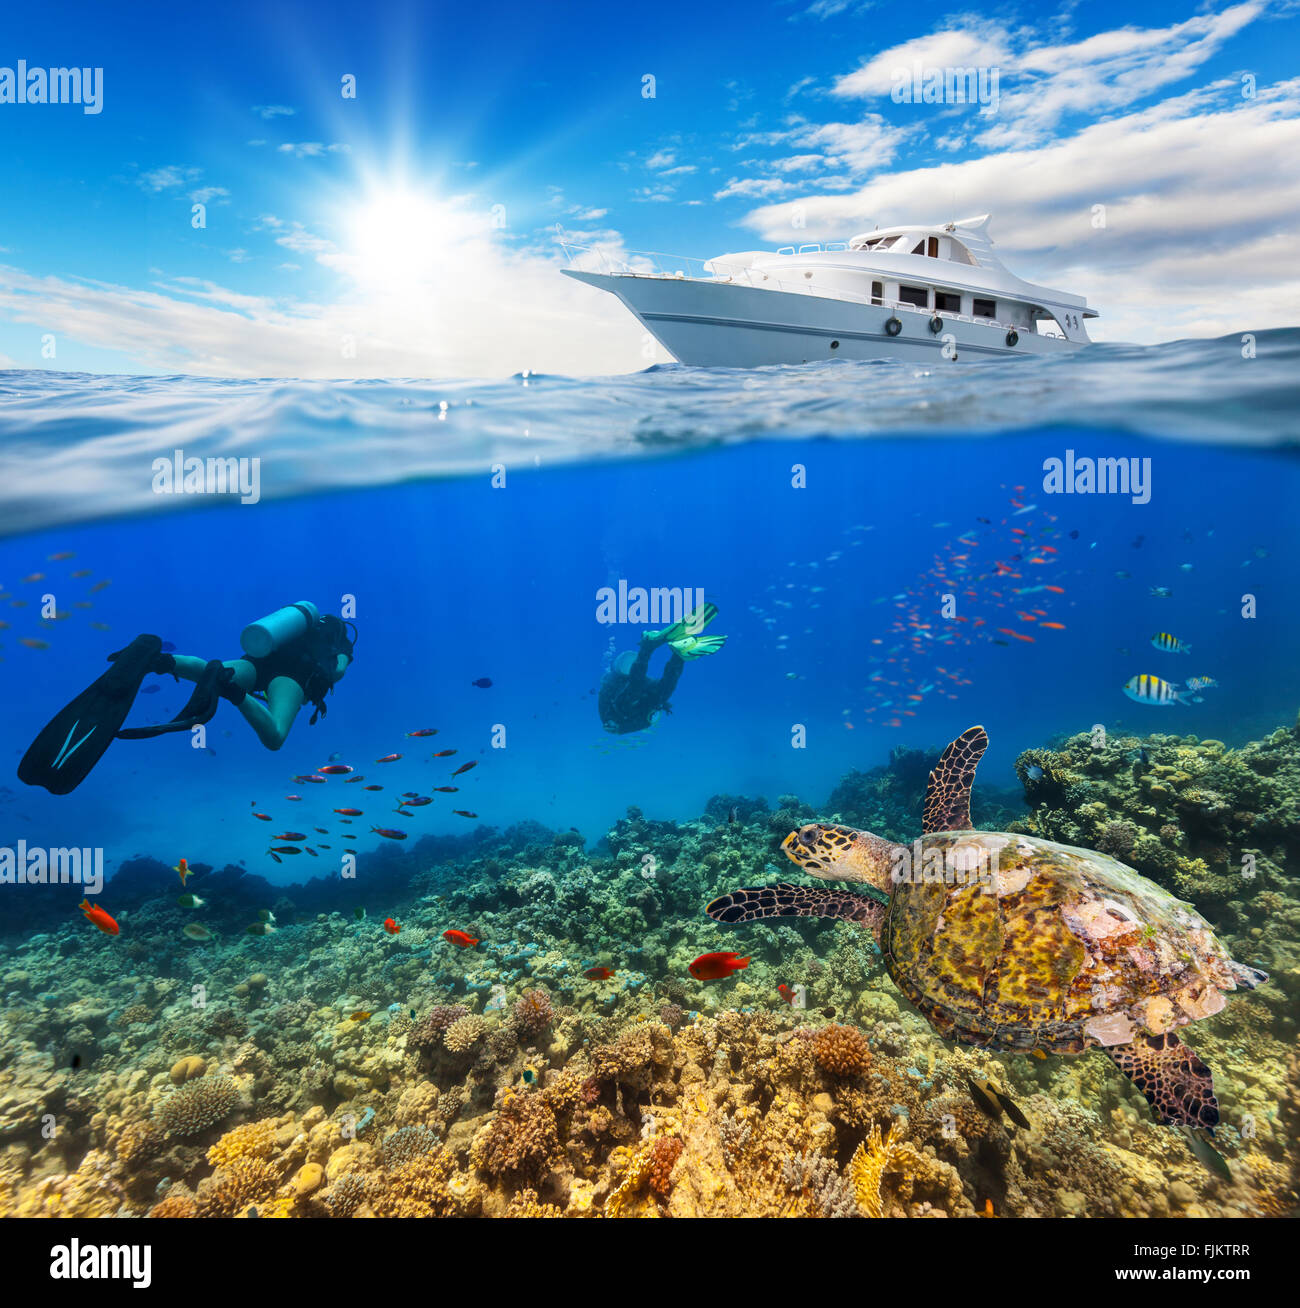 Underwater coral reef with scuba divers Stock Photo